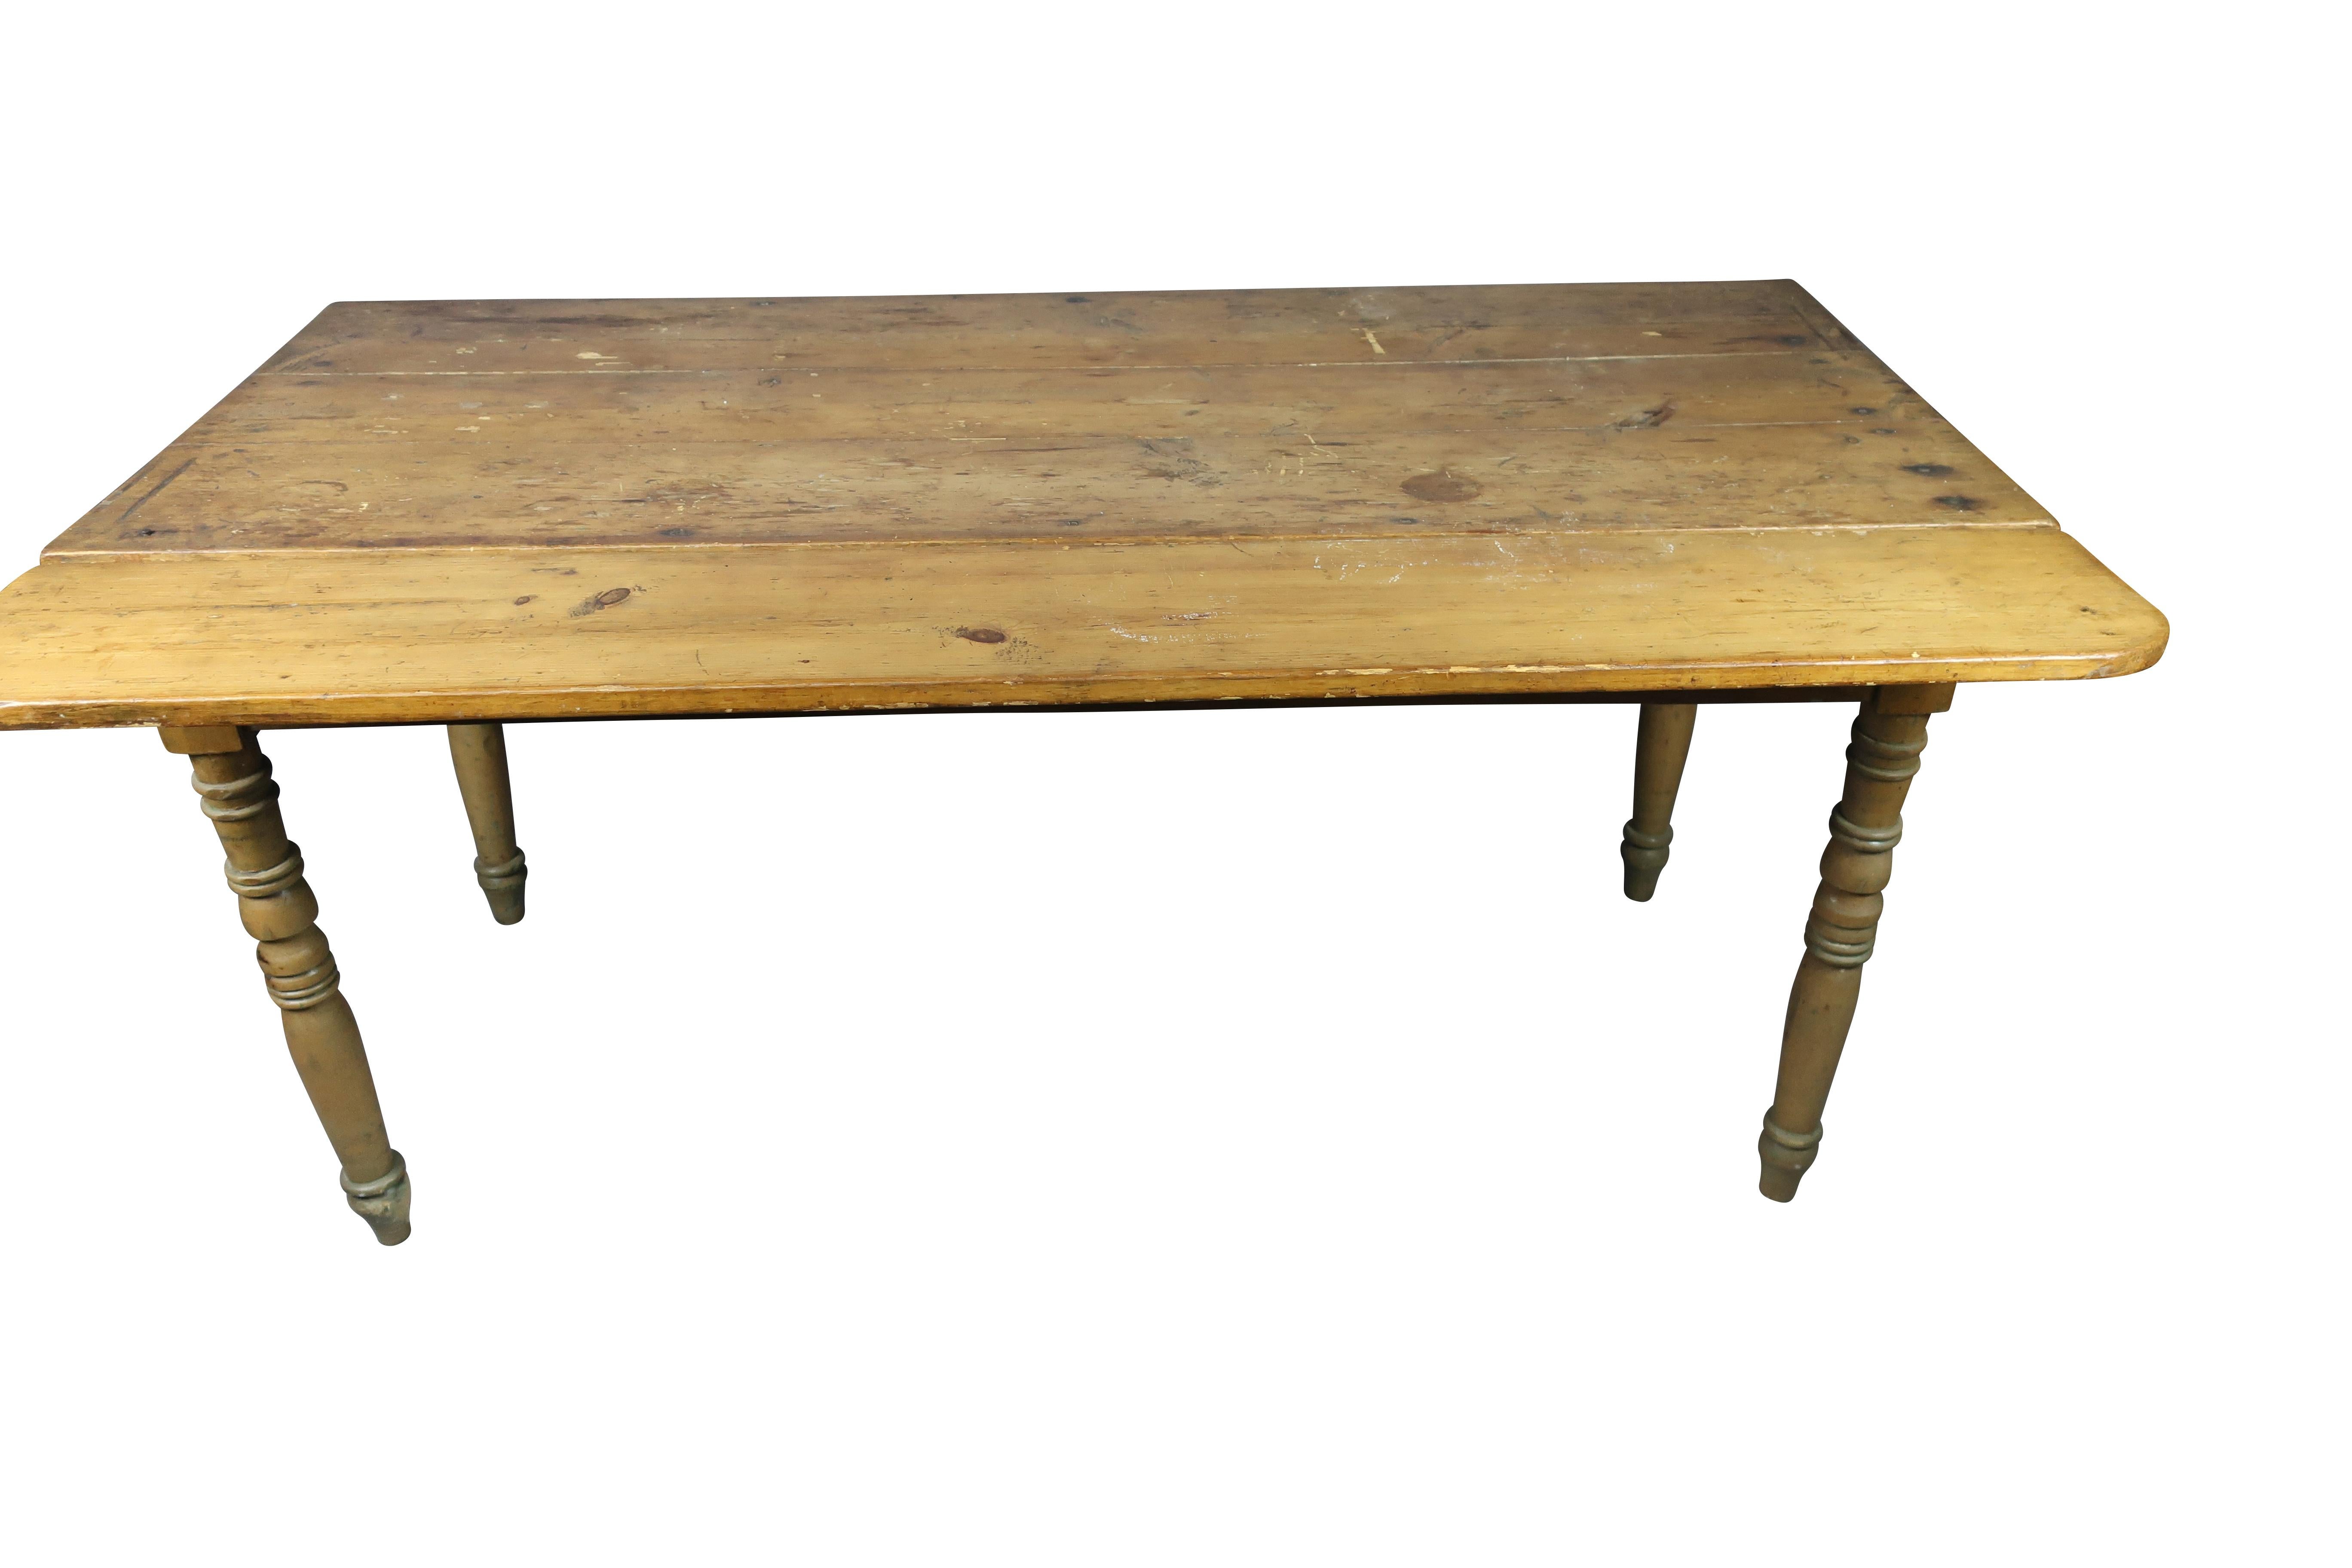 Farmhouse early pine drop-leaf harvest dining table, with two drop-leaf sides. Seats 6-8 comfortably. Great patina on the tabletop. Traces of original green paint on legs.